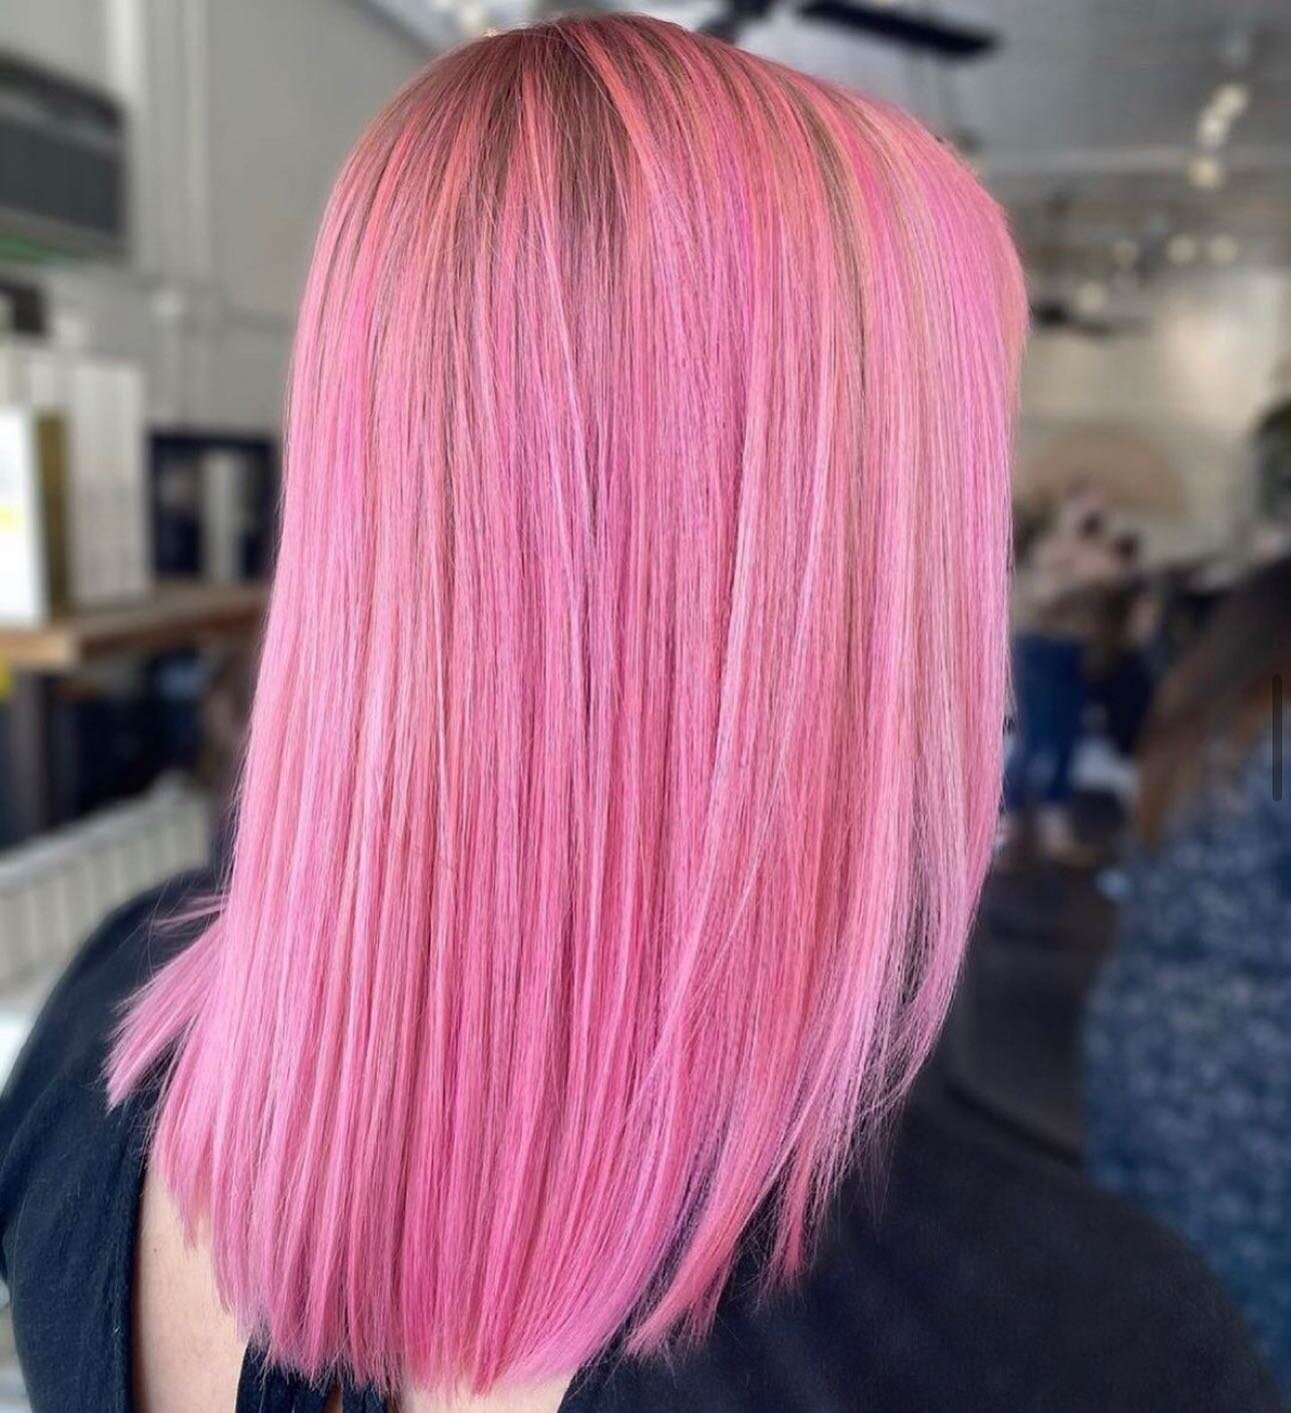 Pink is the new blonde 💕 hair by Valentina @foiling__around